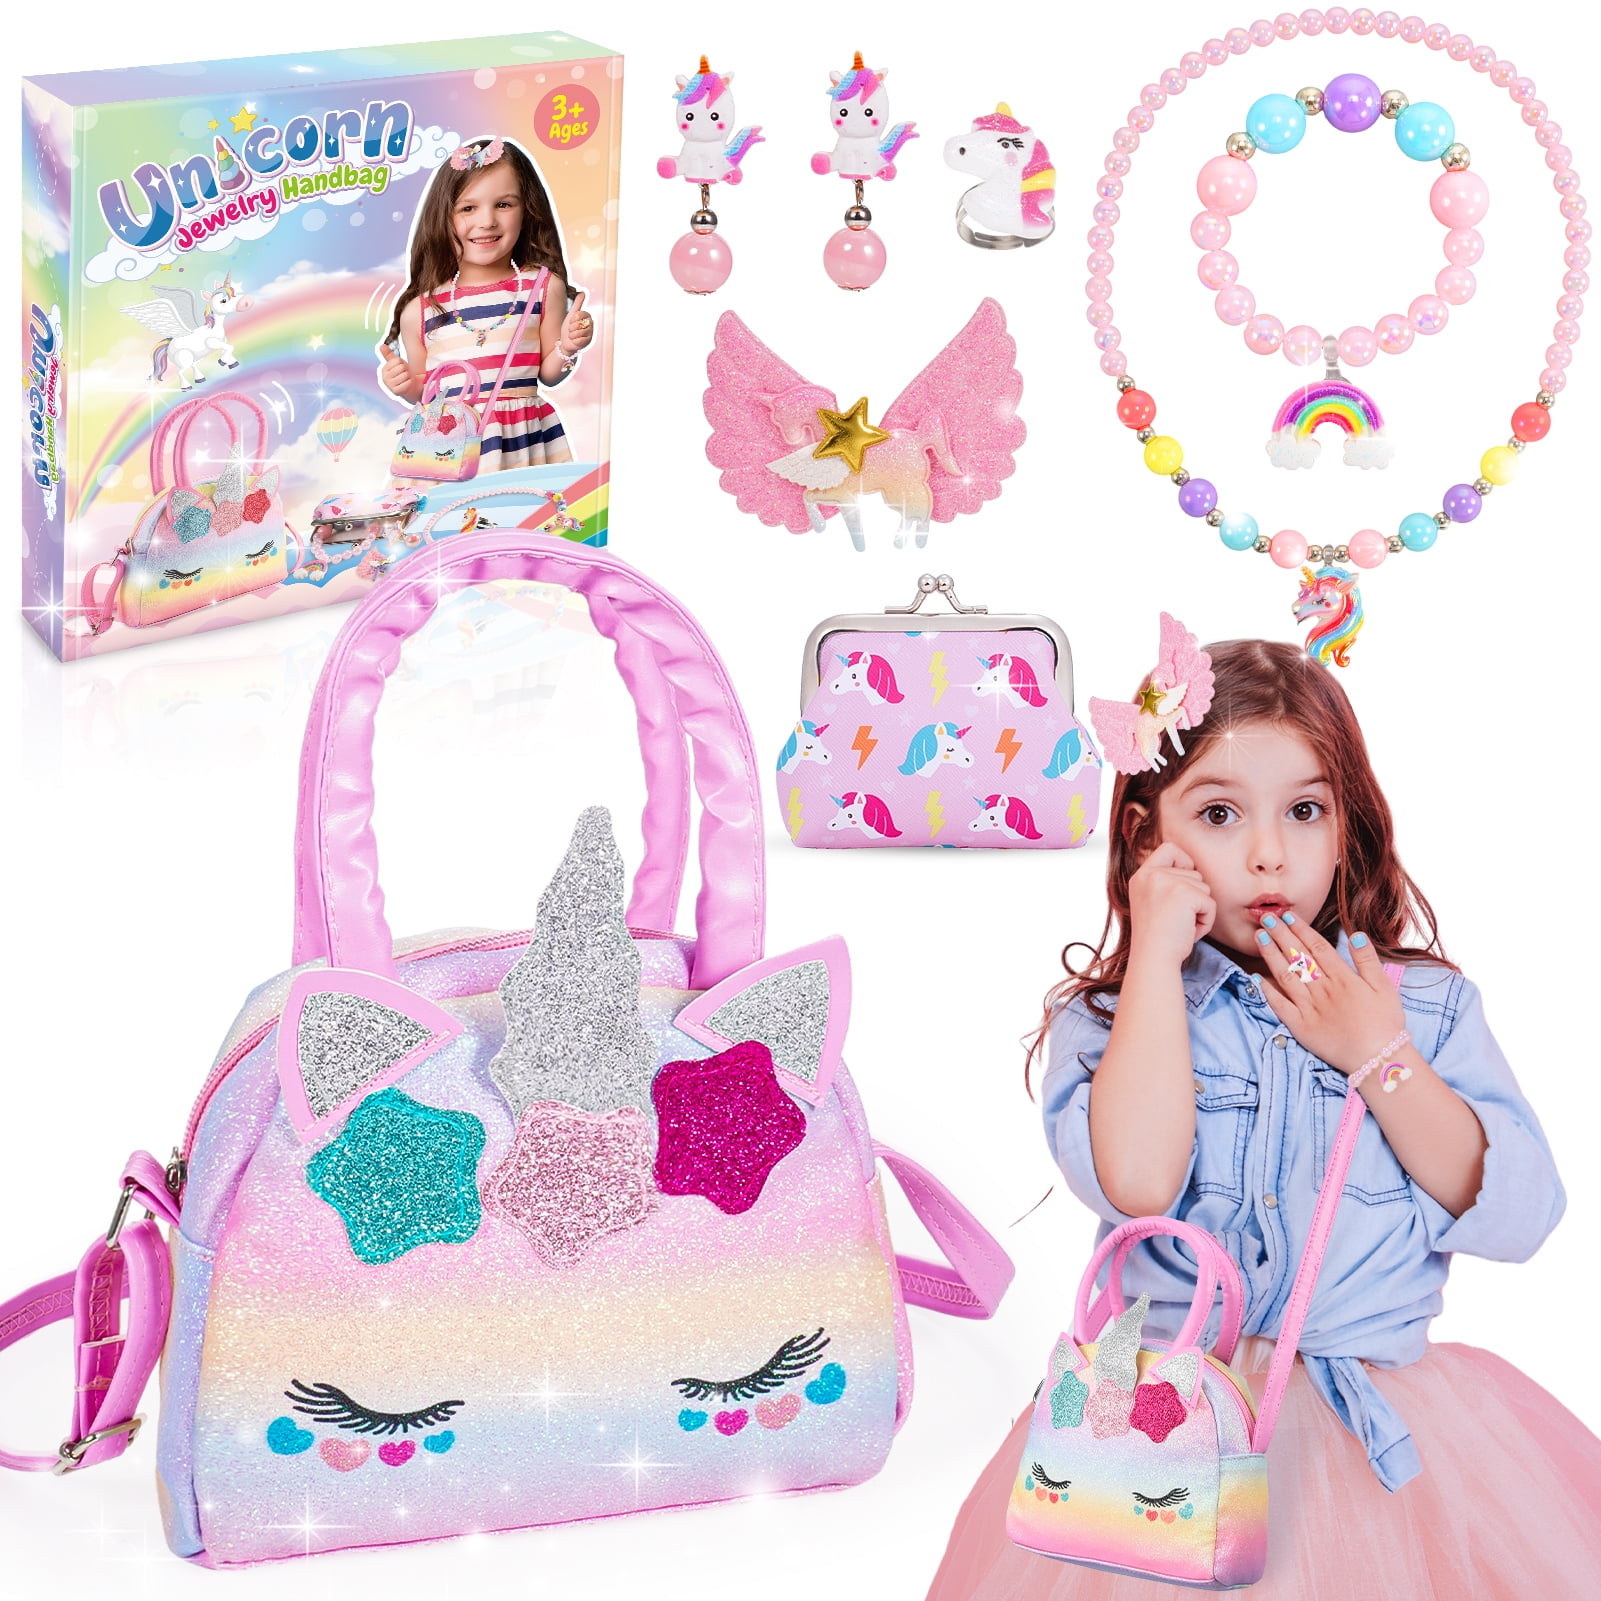 Unicorn Gifts Girls Age 3 9 Purse little Girls Crossbody Bags Pretend Play Toys 3 4 5 6 7 8 Year Old Gifts Dress Up Jewelry Set 99d778a6 50f0 4aae b417 55e96e19036e.7c06a4acb0252a8d32e870d442333cb3